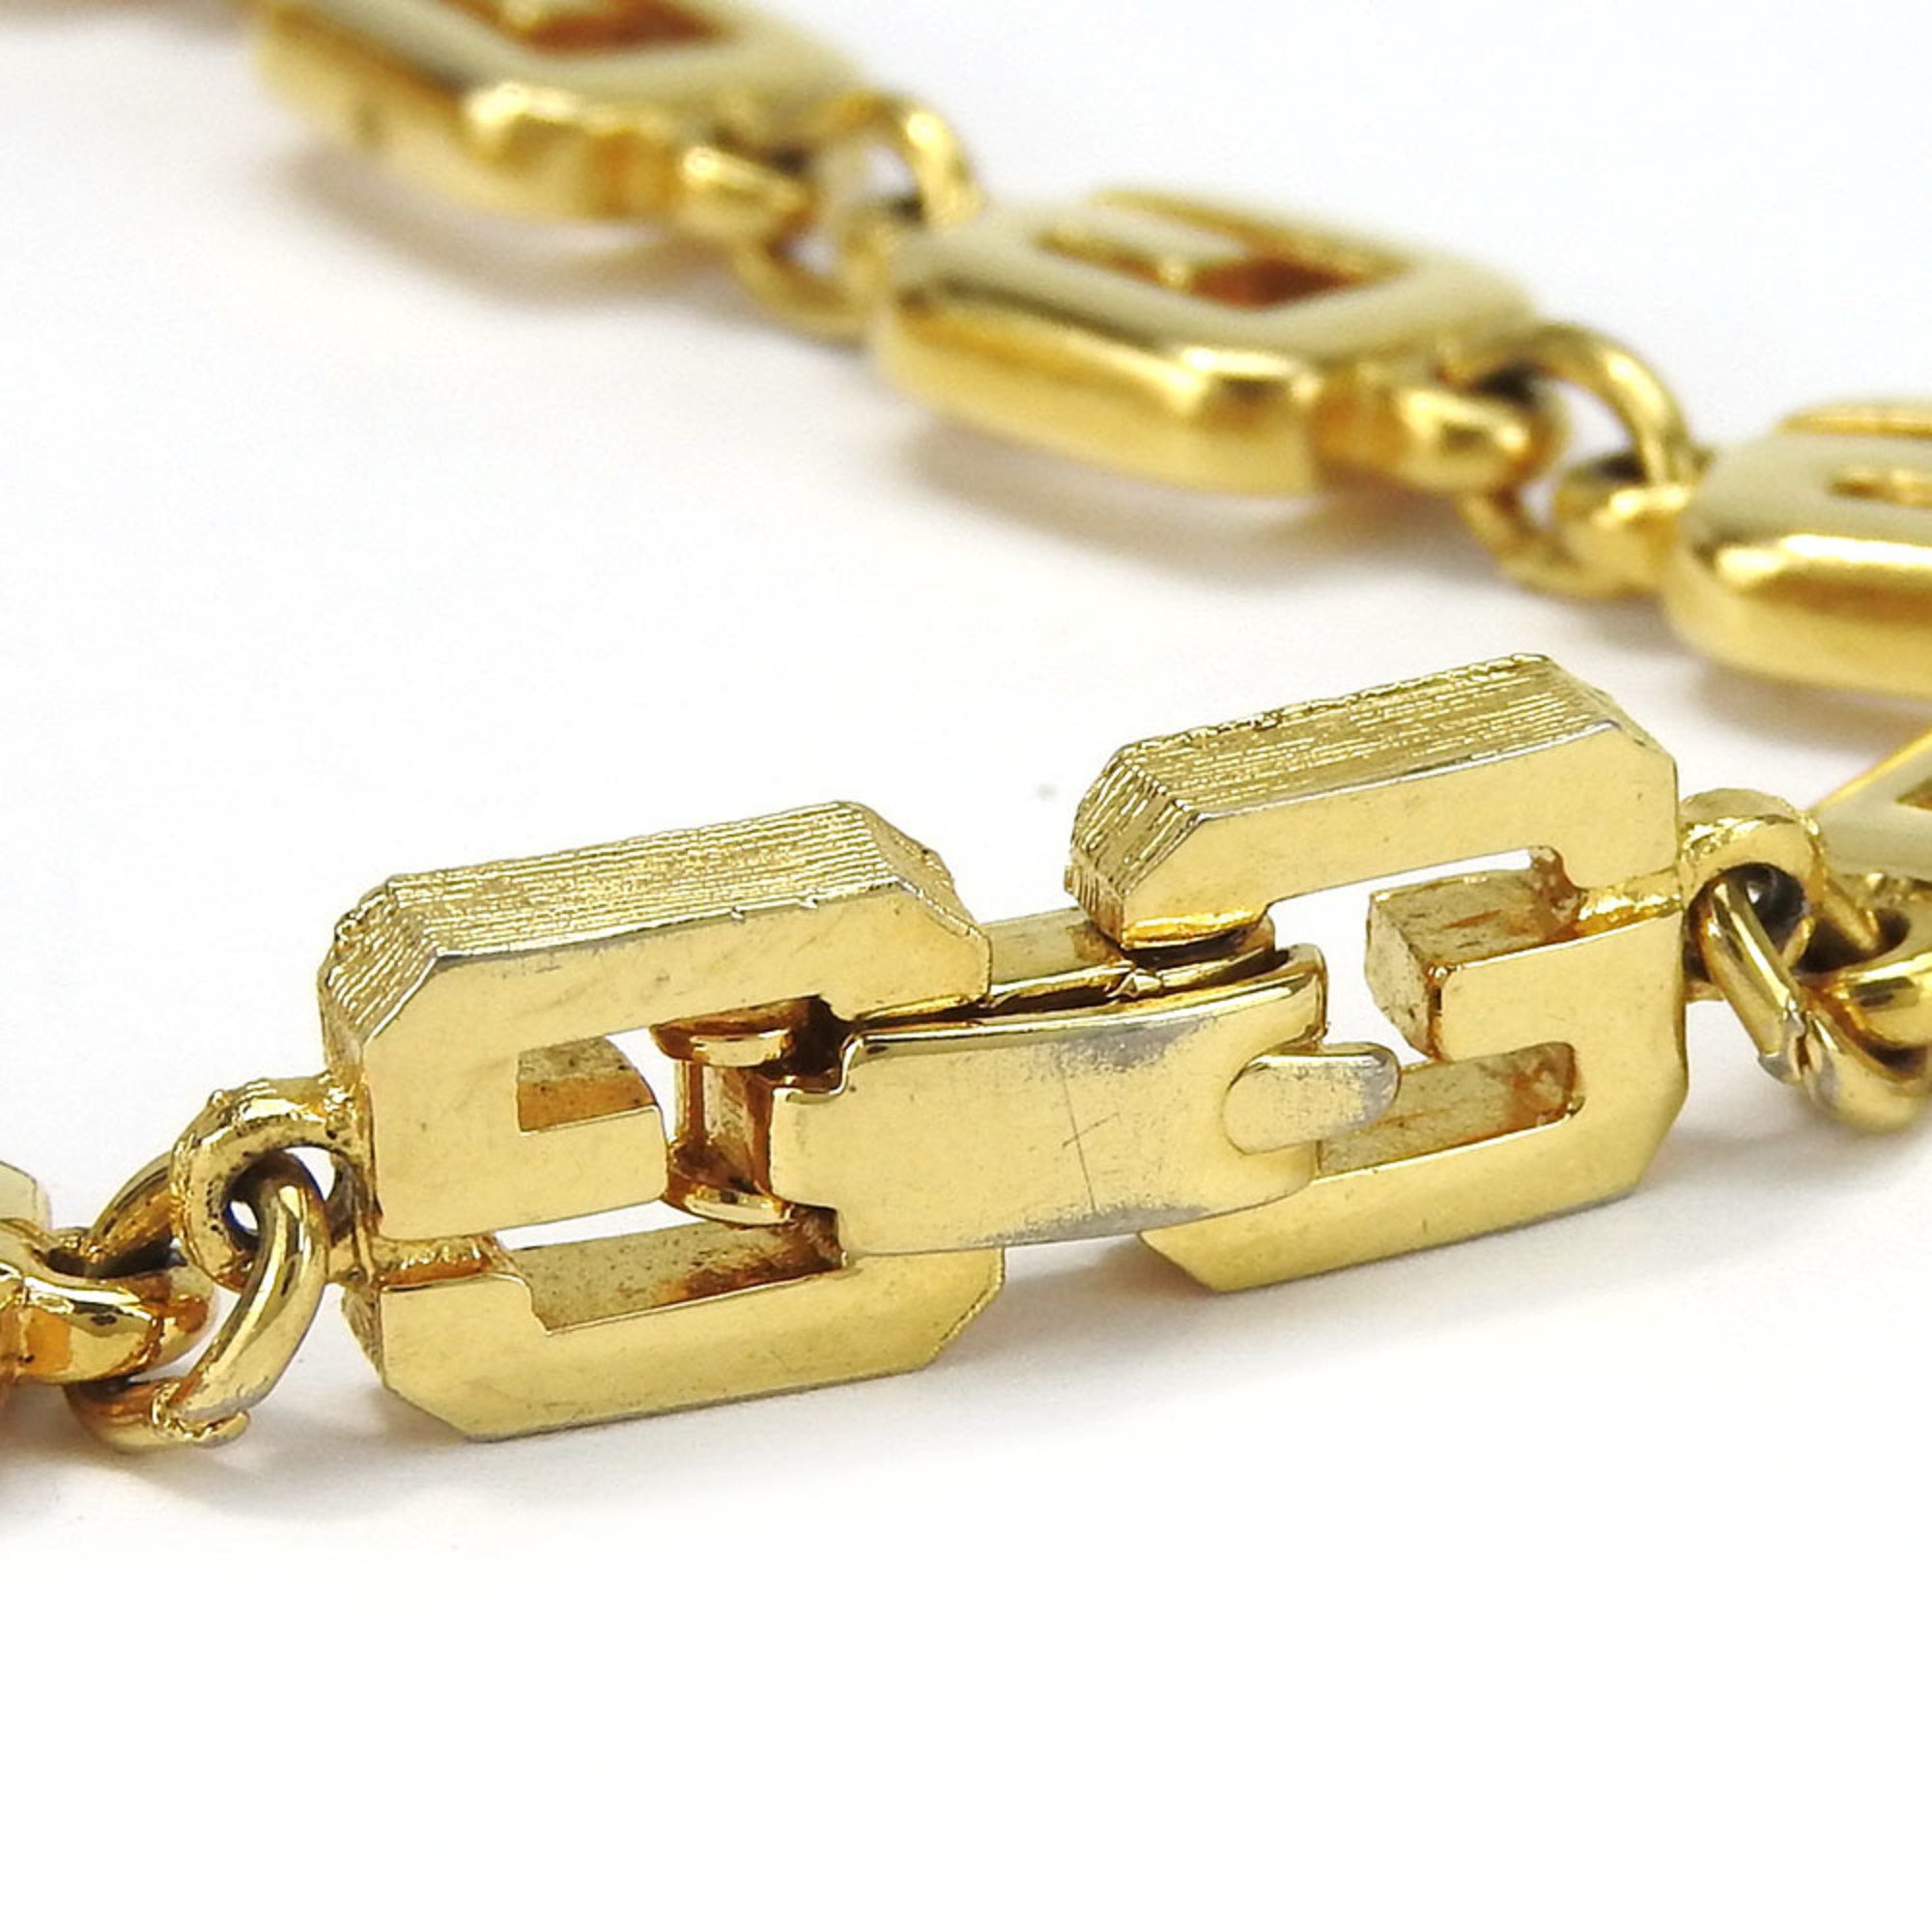 Givenchy bracelet metal gold plated women's